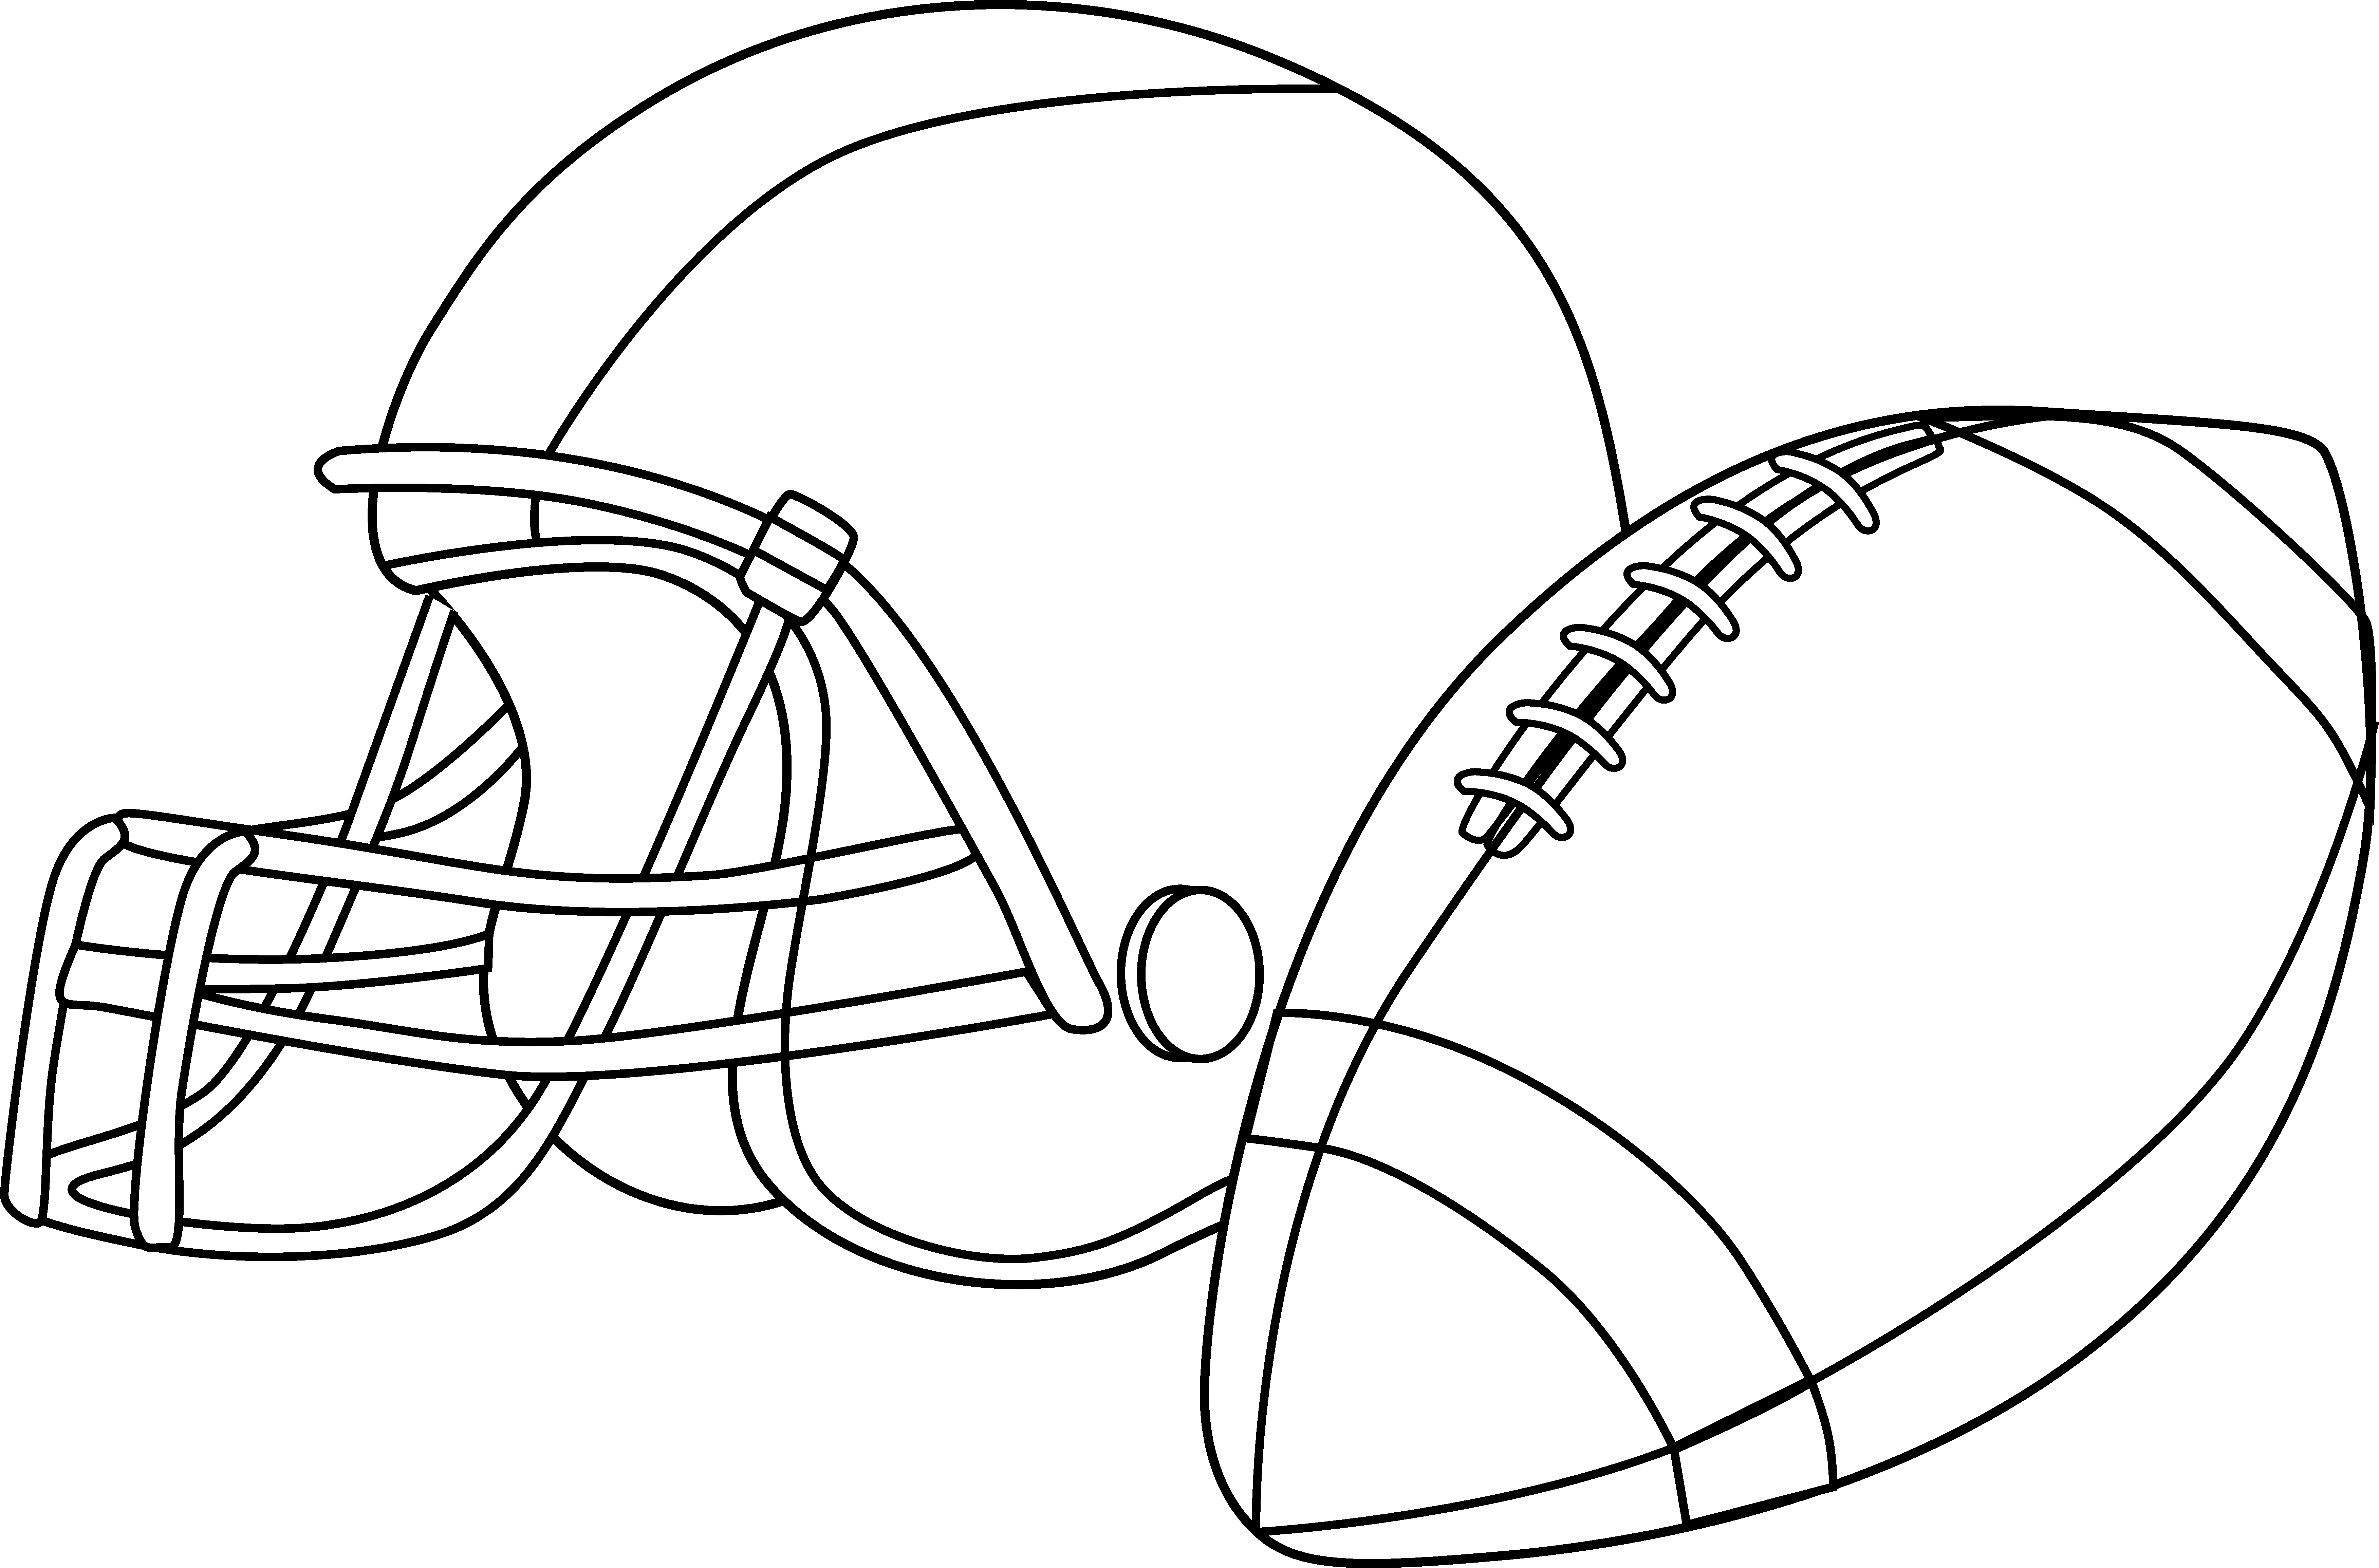 Football or Rugby Coloring Page - Free Clip Art